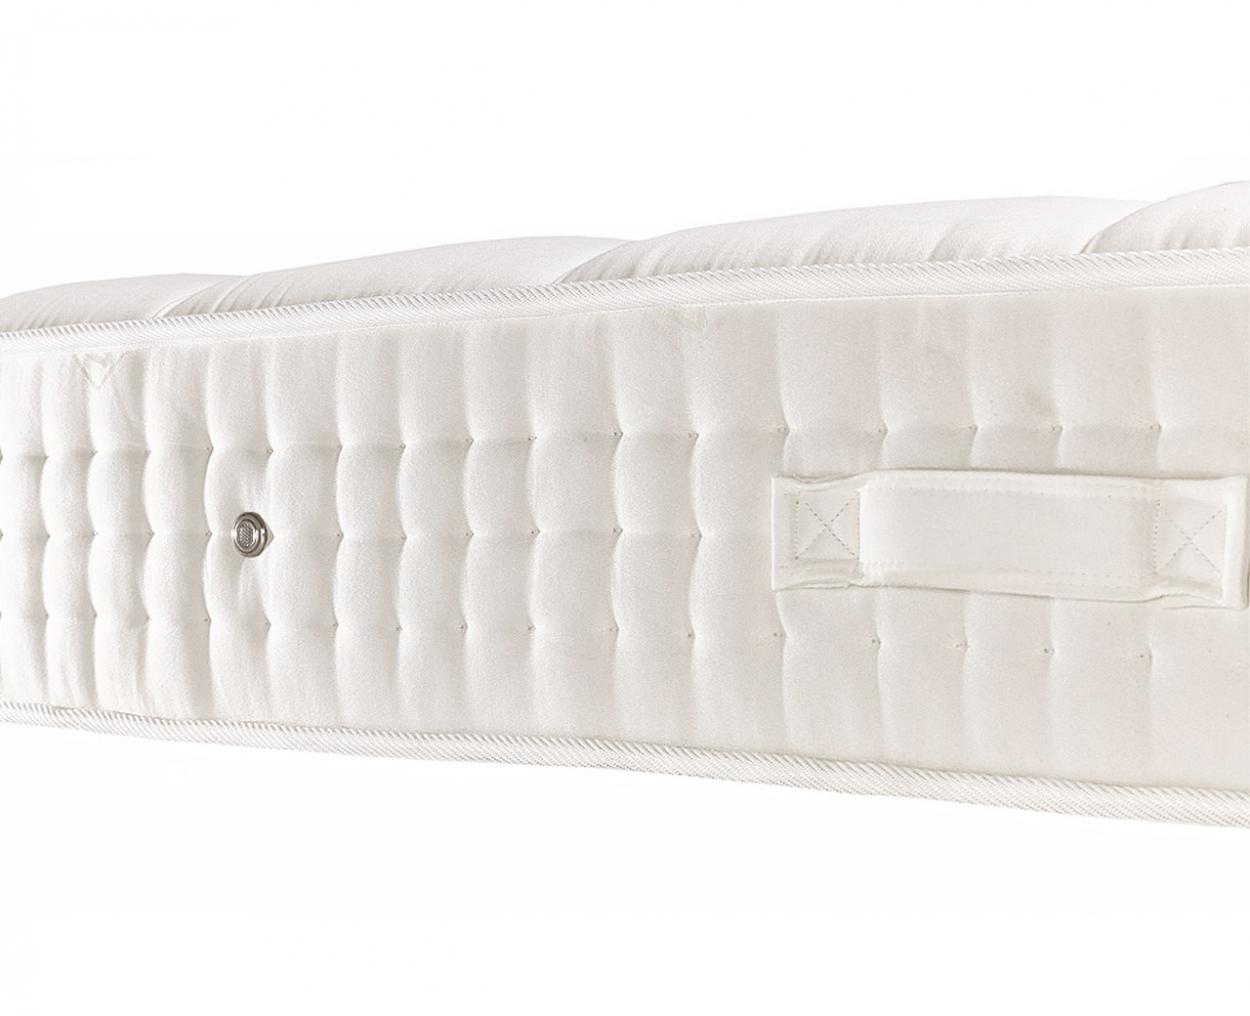 CandiaStrom - Mattress HELIOS - HYPERION COLLECTION -  Side View